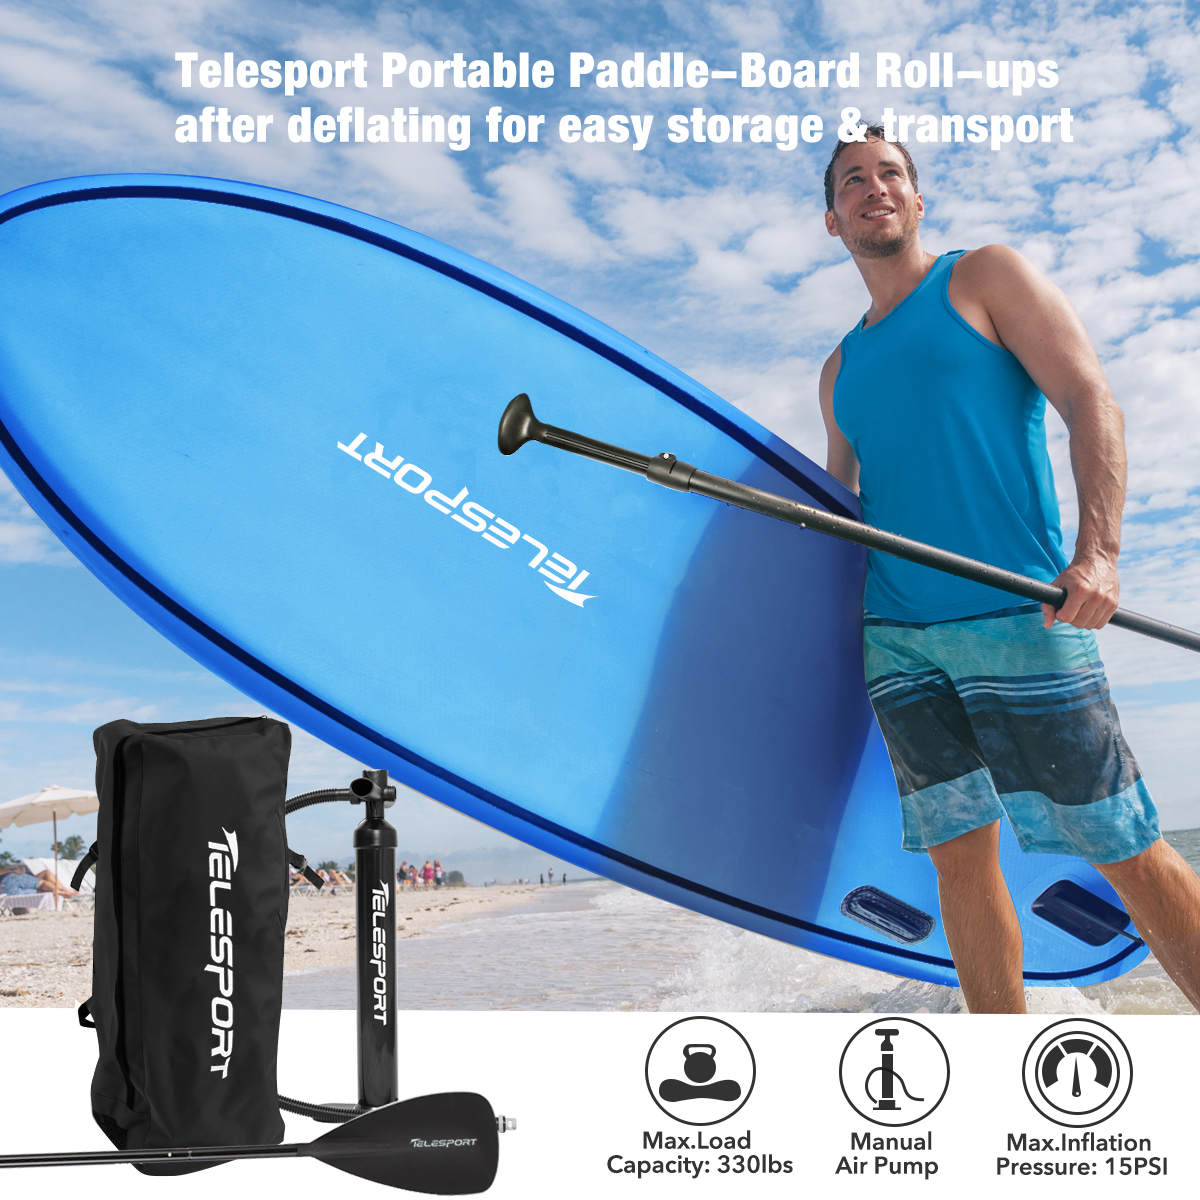 Telesport Inflatable Stand Up Paddle Board 10.6ft with SUP Carry Bag, Adjustable Paddles Non-Slip Deck, Leash and Fin for Padding Surfing - image 3 of 7